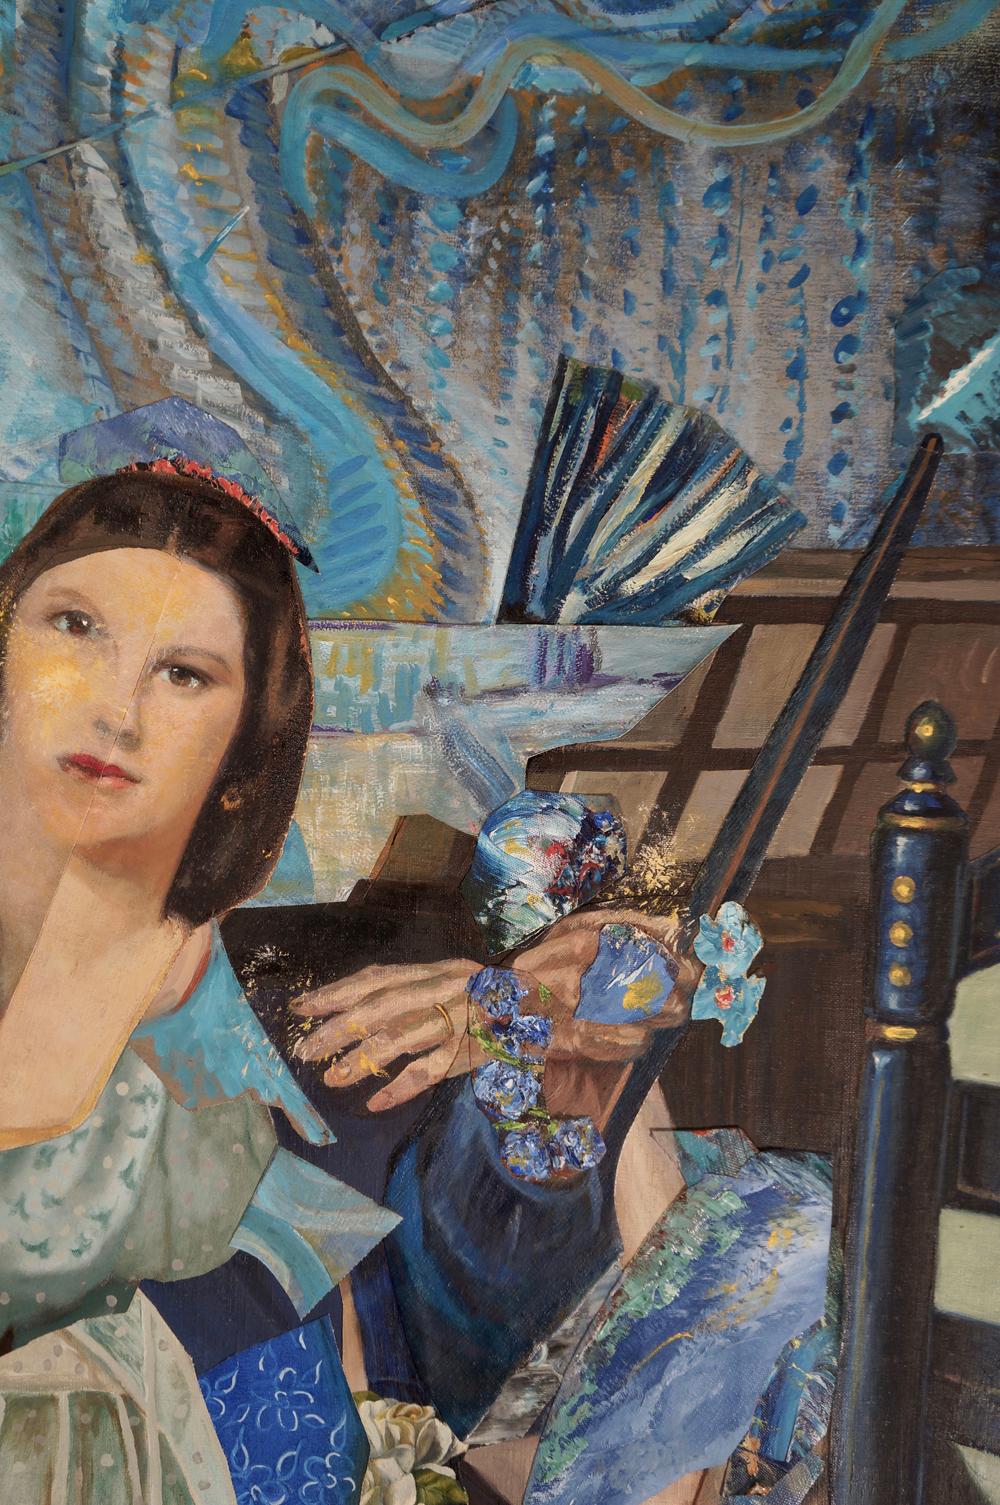 John Baker’s “ Imaginary Portrait of Wanda Landowska”, a 72 x 32 inch acrylic painting on canvas with collage in rich azure and ultramarine blues with gold and reddish brown highlights, describes the inner life and accomplishments of Wanda Landowska